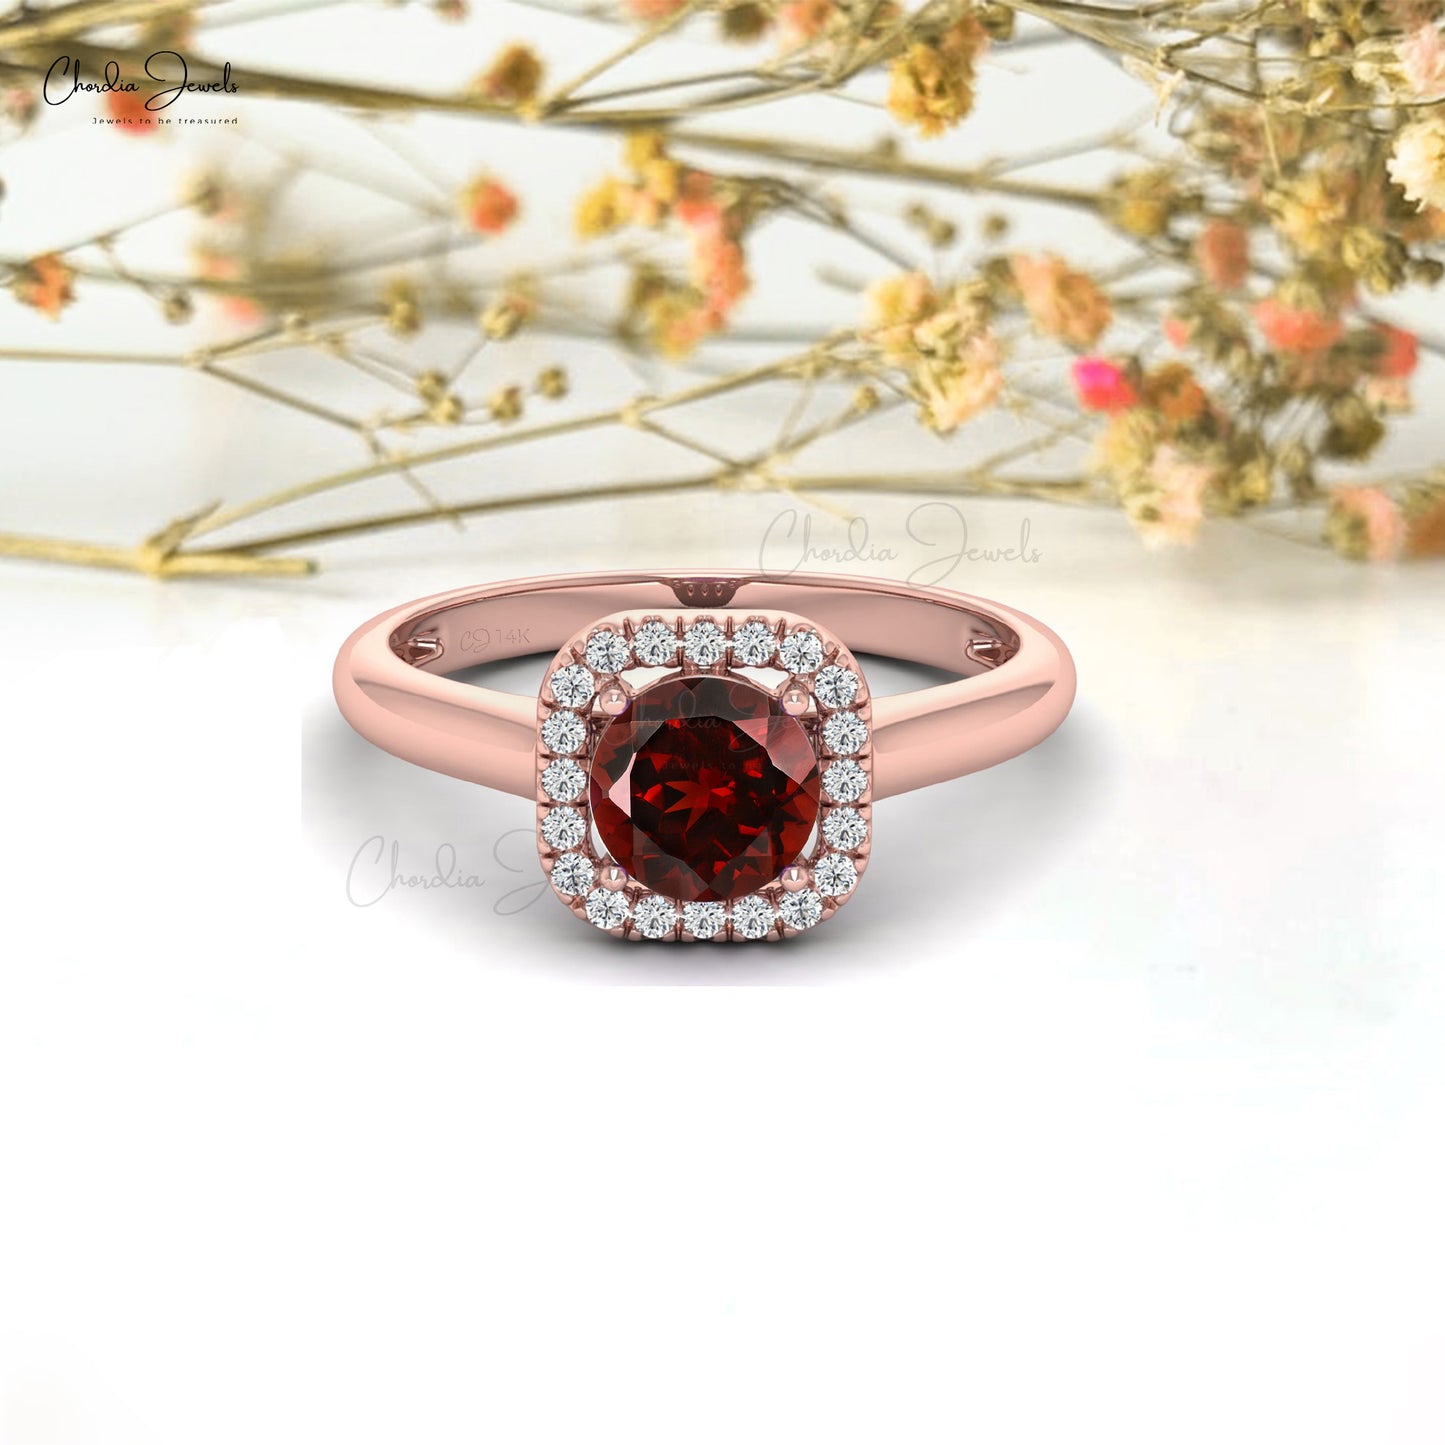 Natural Garnet and Diamond Dainty Ring in 14k Solid Gold For Anniversary